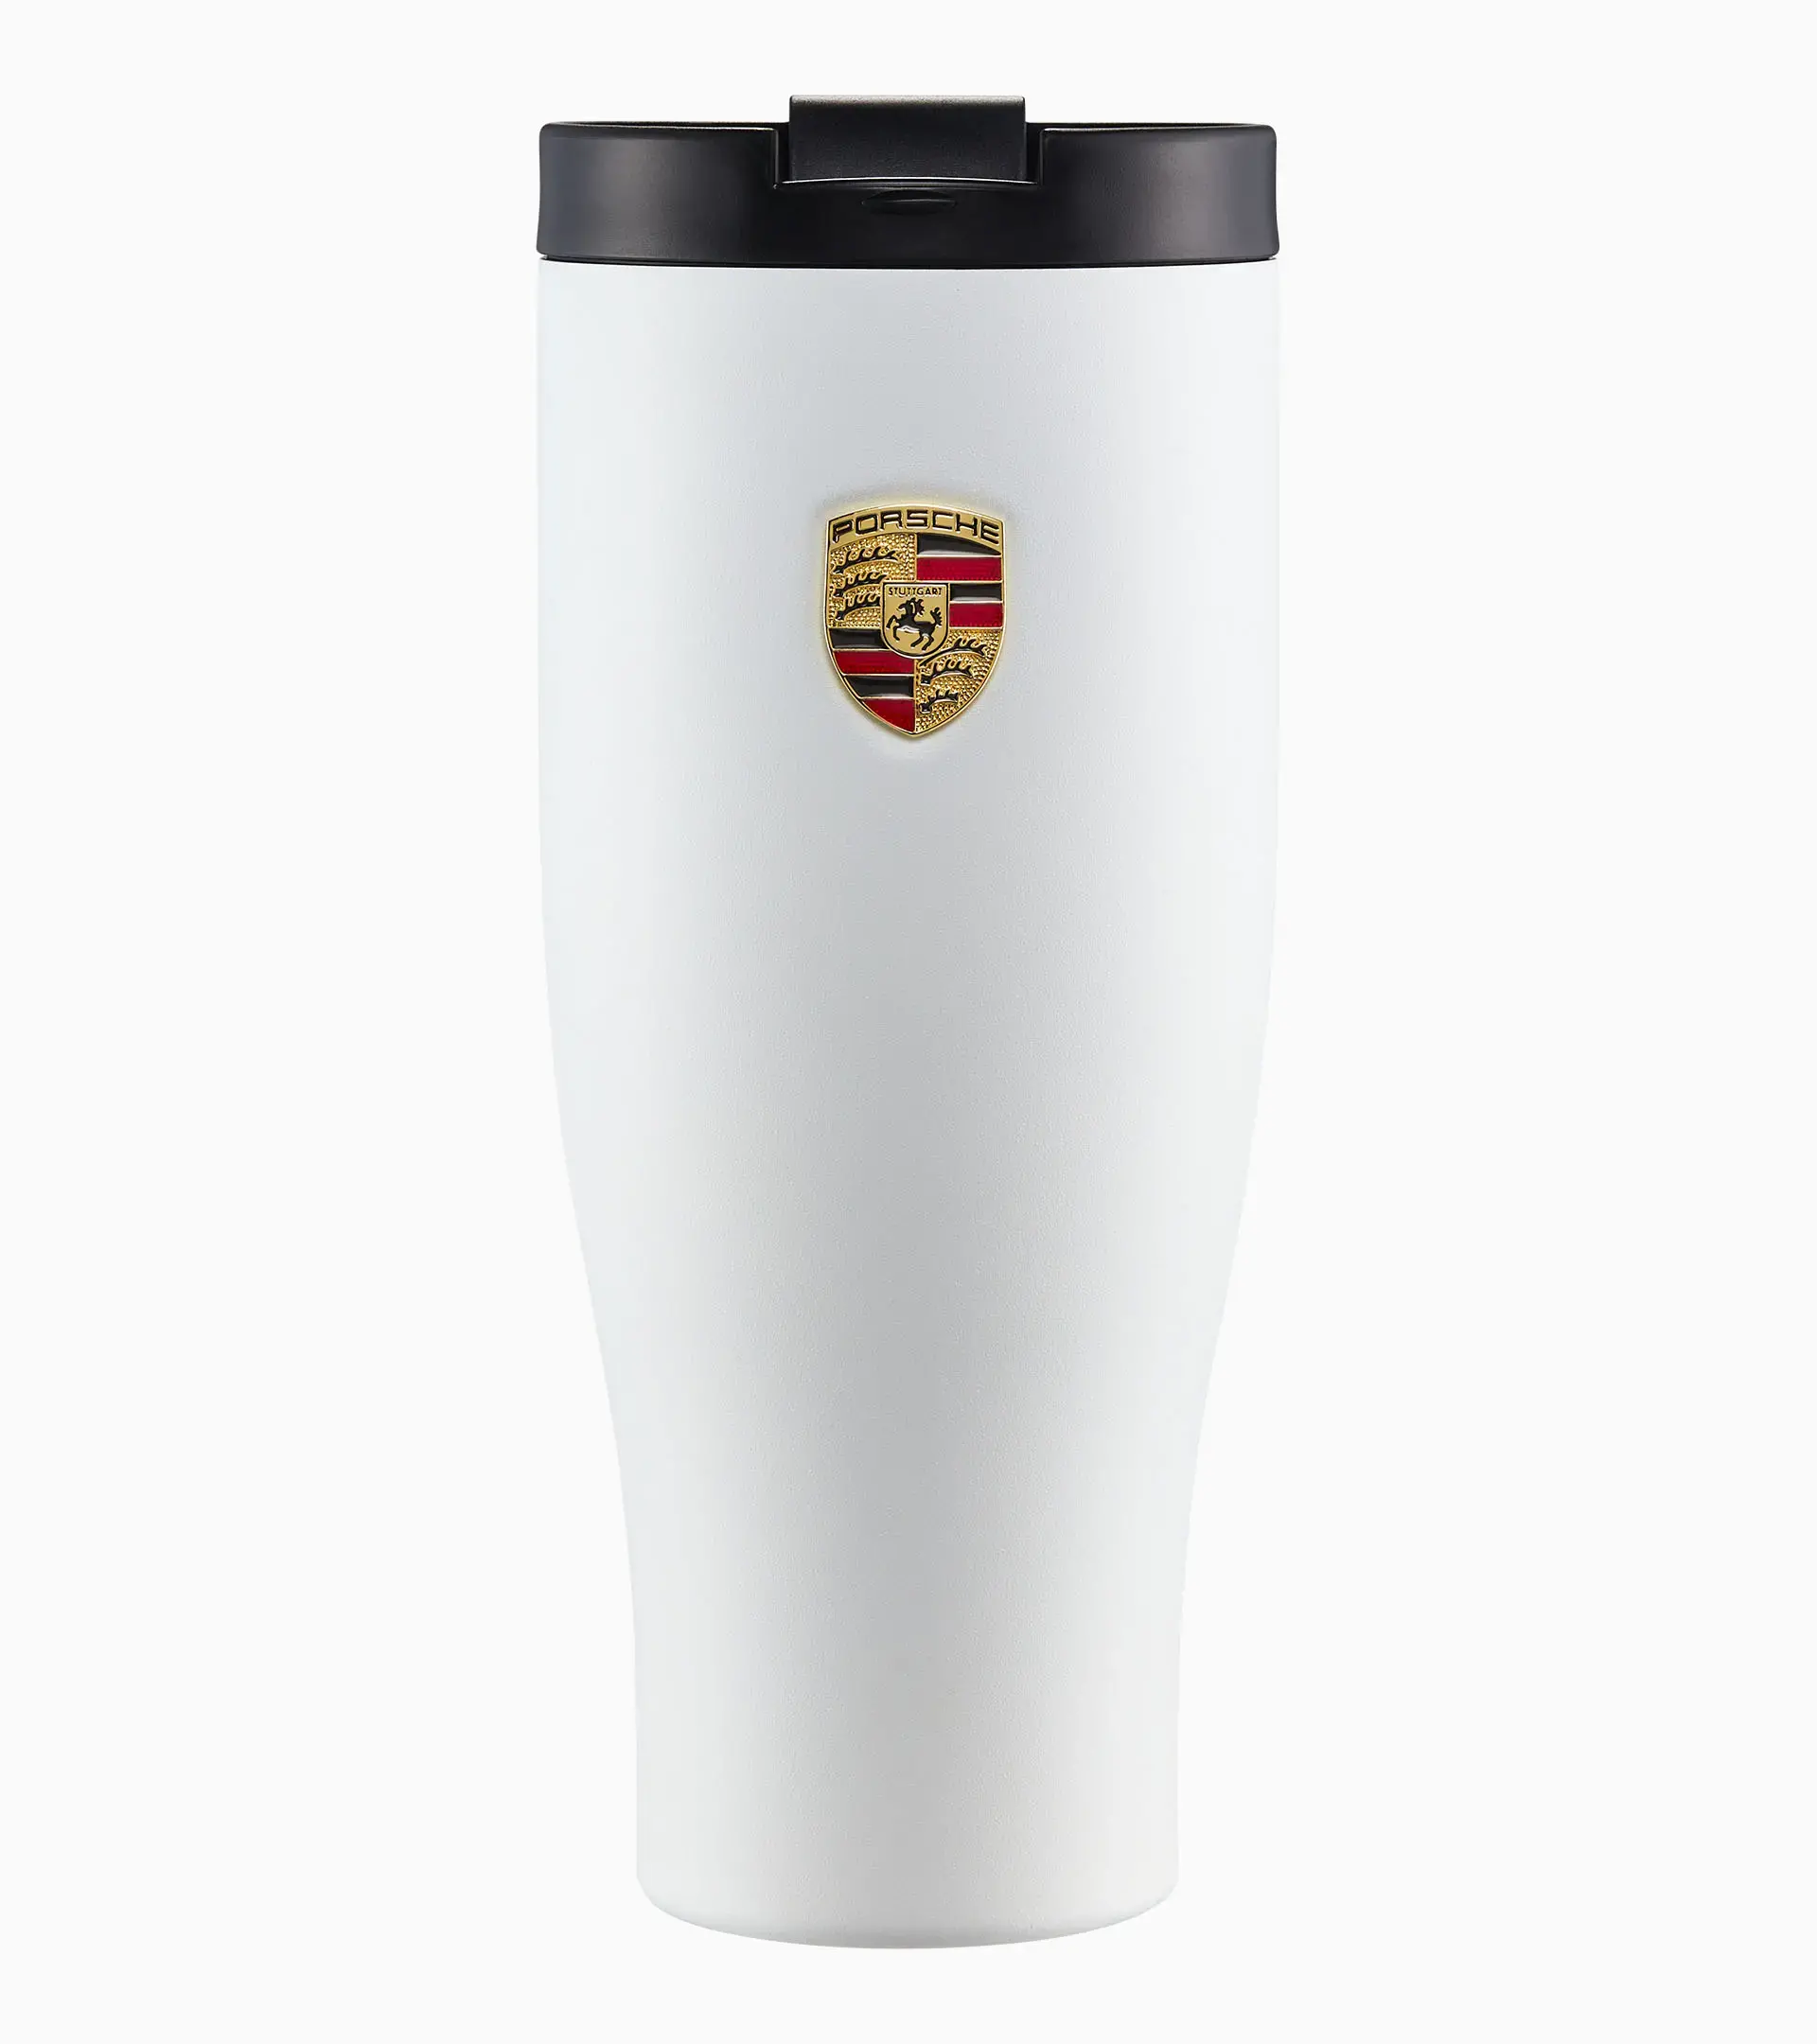 Genuine Porsche Stainless Steel Thermos Insulated Coffee Flask Bottle Cup  33oz